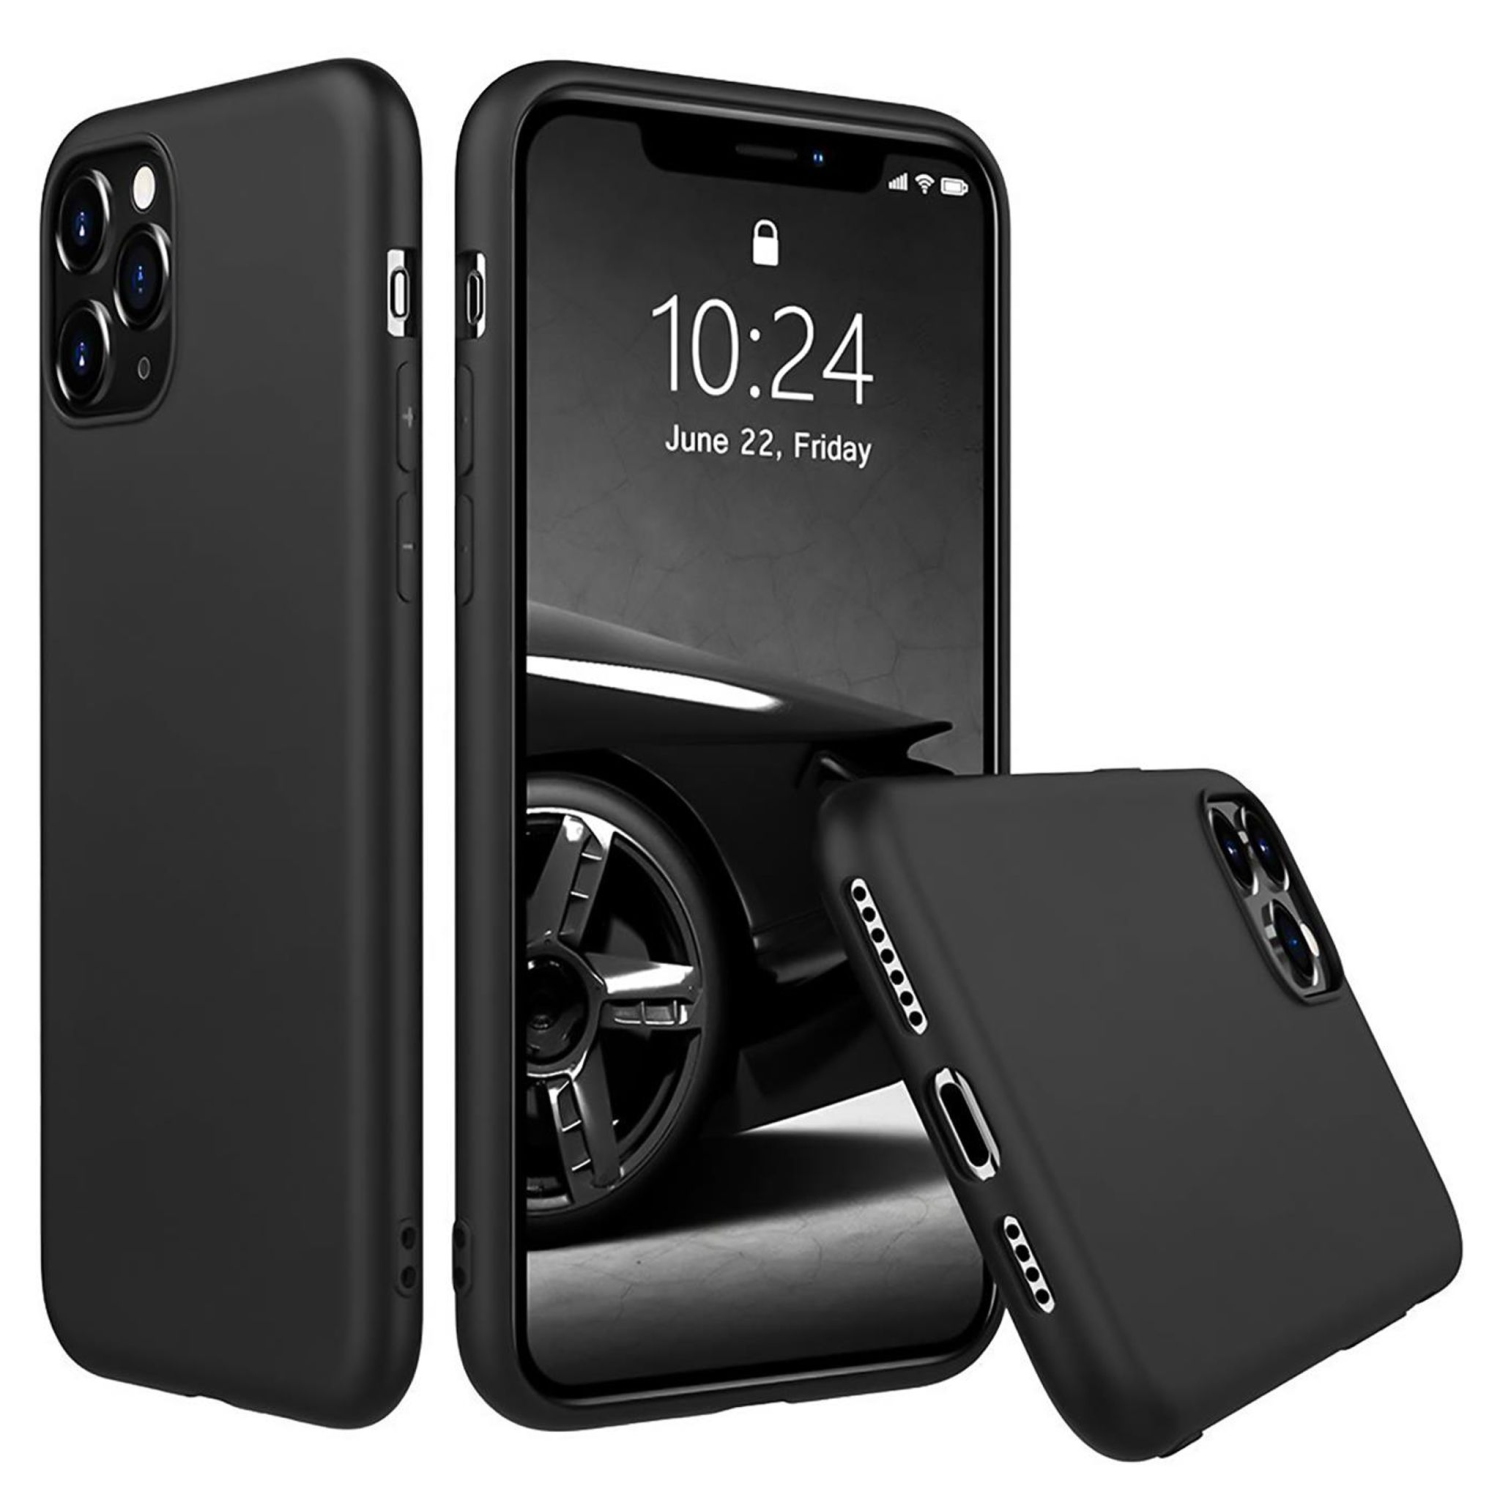 Safety Case iPhone X/Xs Matte Finish Black Silicone Case Full Body Protection Shockproof Gel Rubber Cover (iPhone X/Xs, Matte Case)